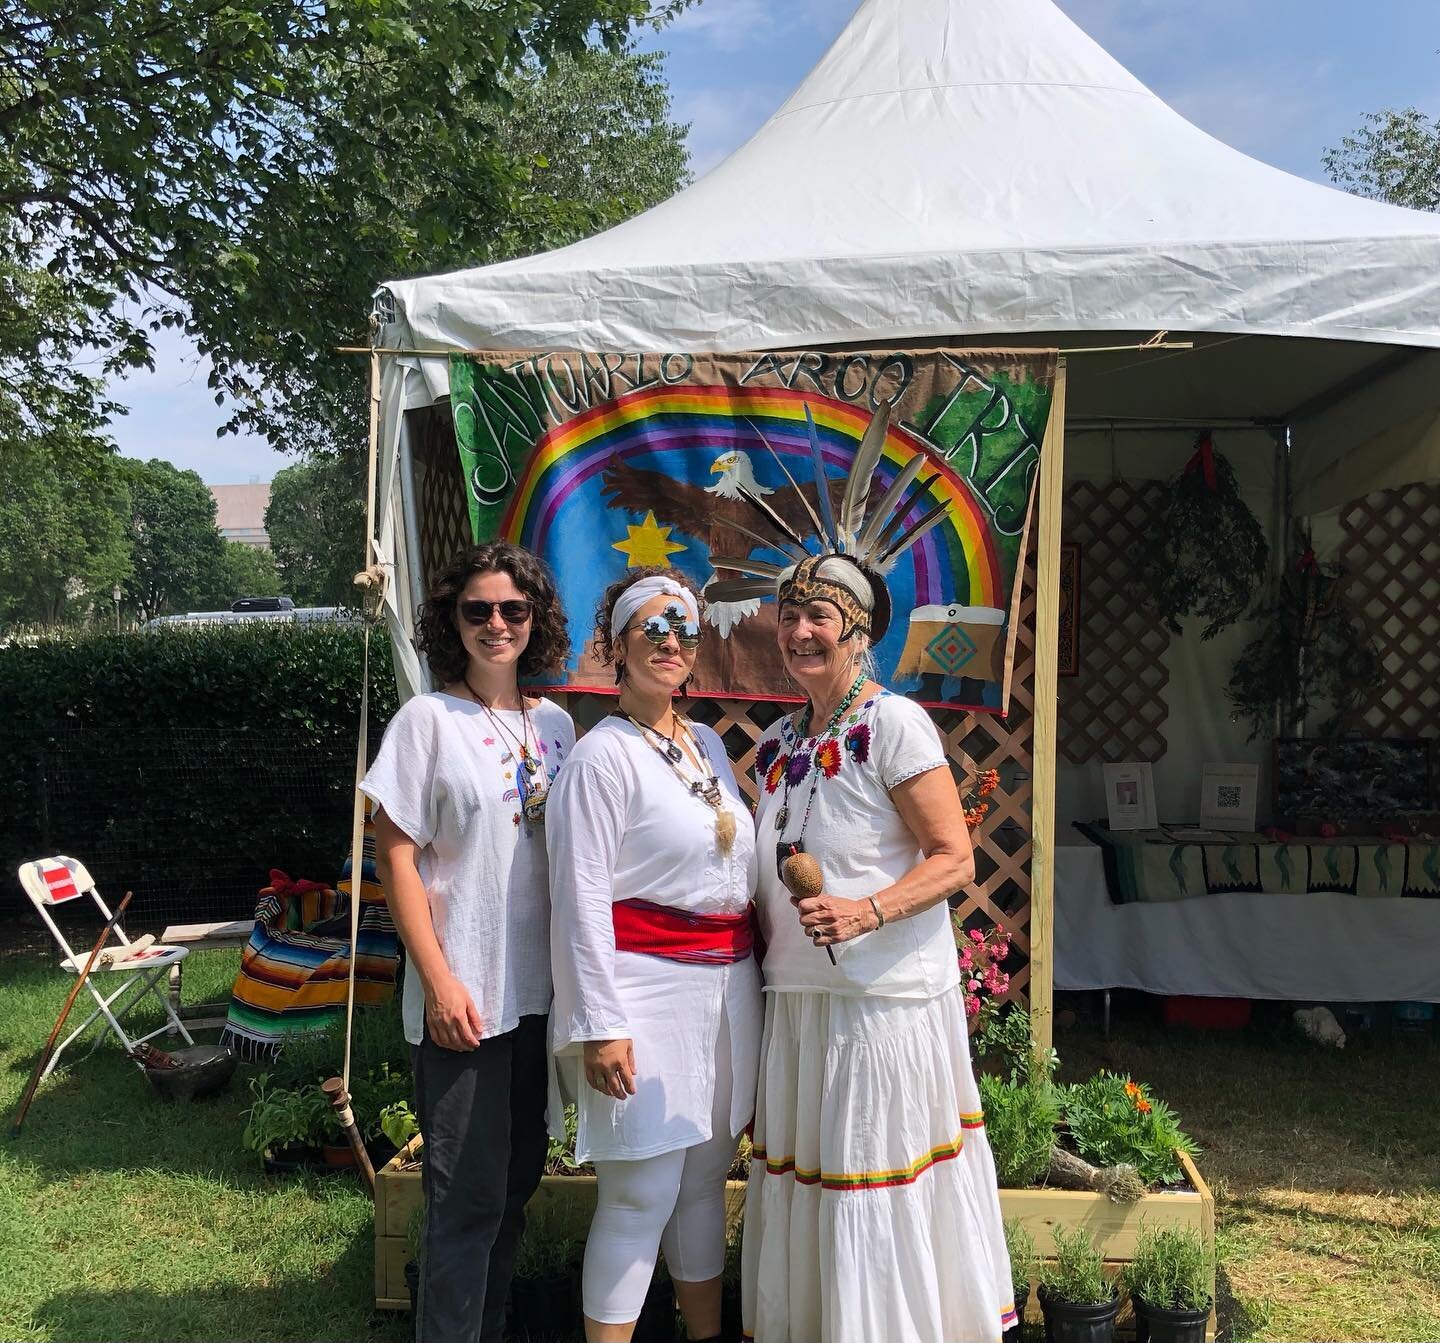 Today is Day 4 of the Smithsonian Folklife Festival! 

We have been humbled by the reception we&rsquo;ve received from visitors and participants from around the world eager to learn more about our work in the Ozarks. We&rsquo;ll be doing ba&ntilde;os